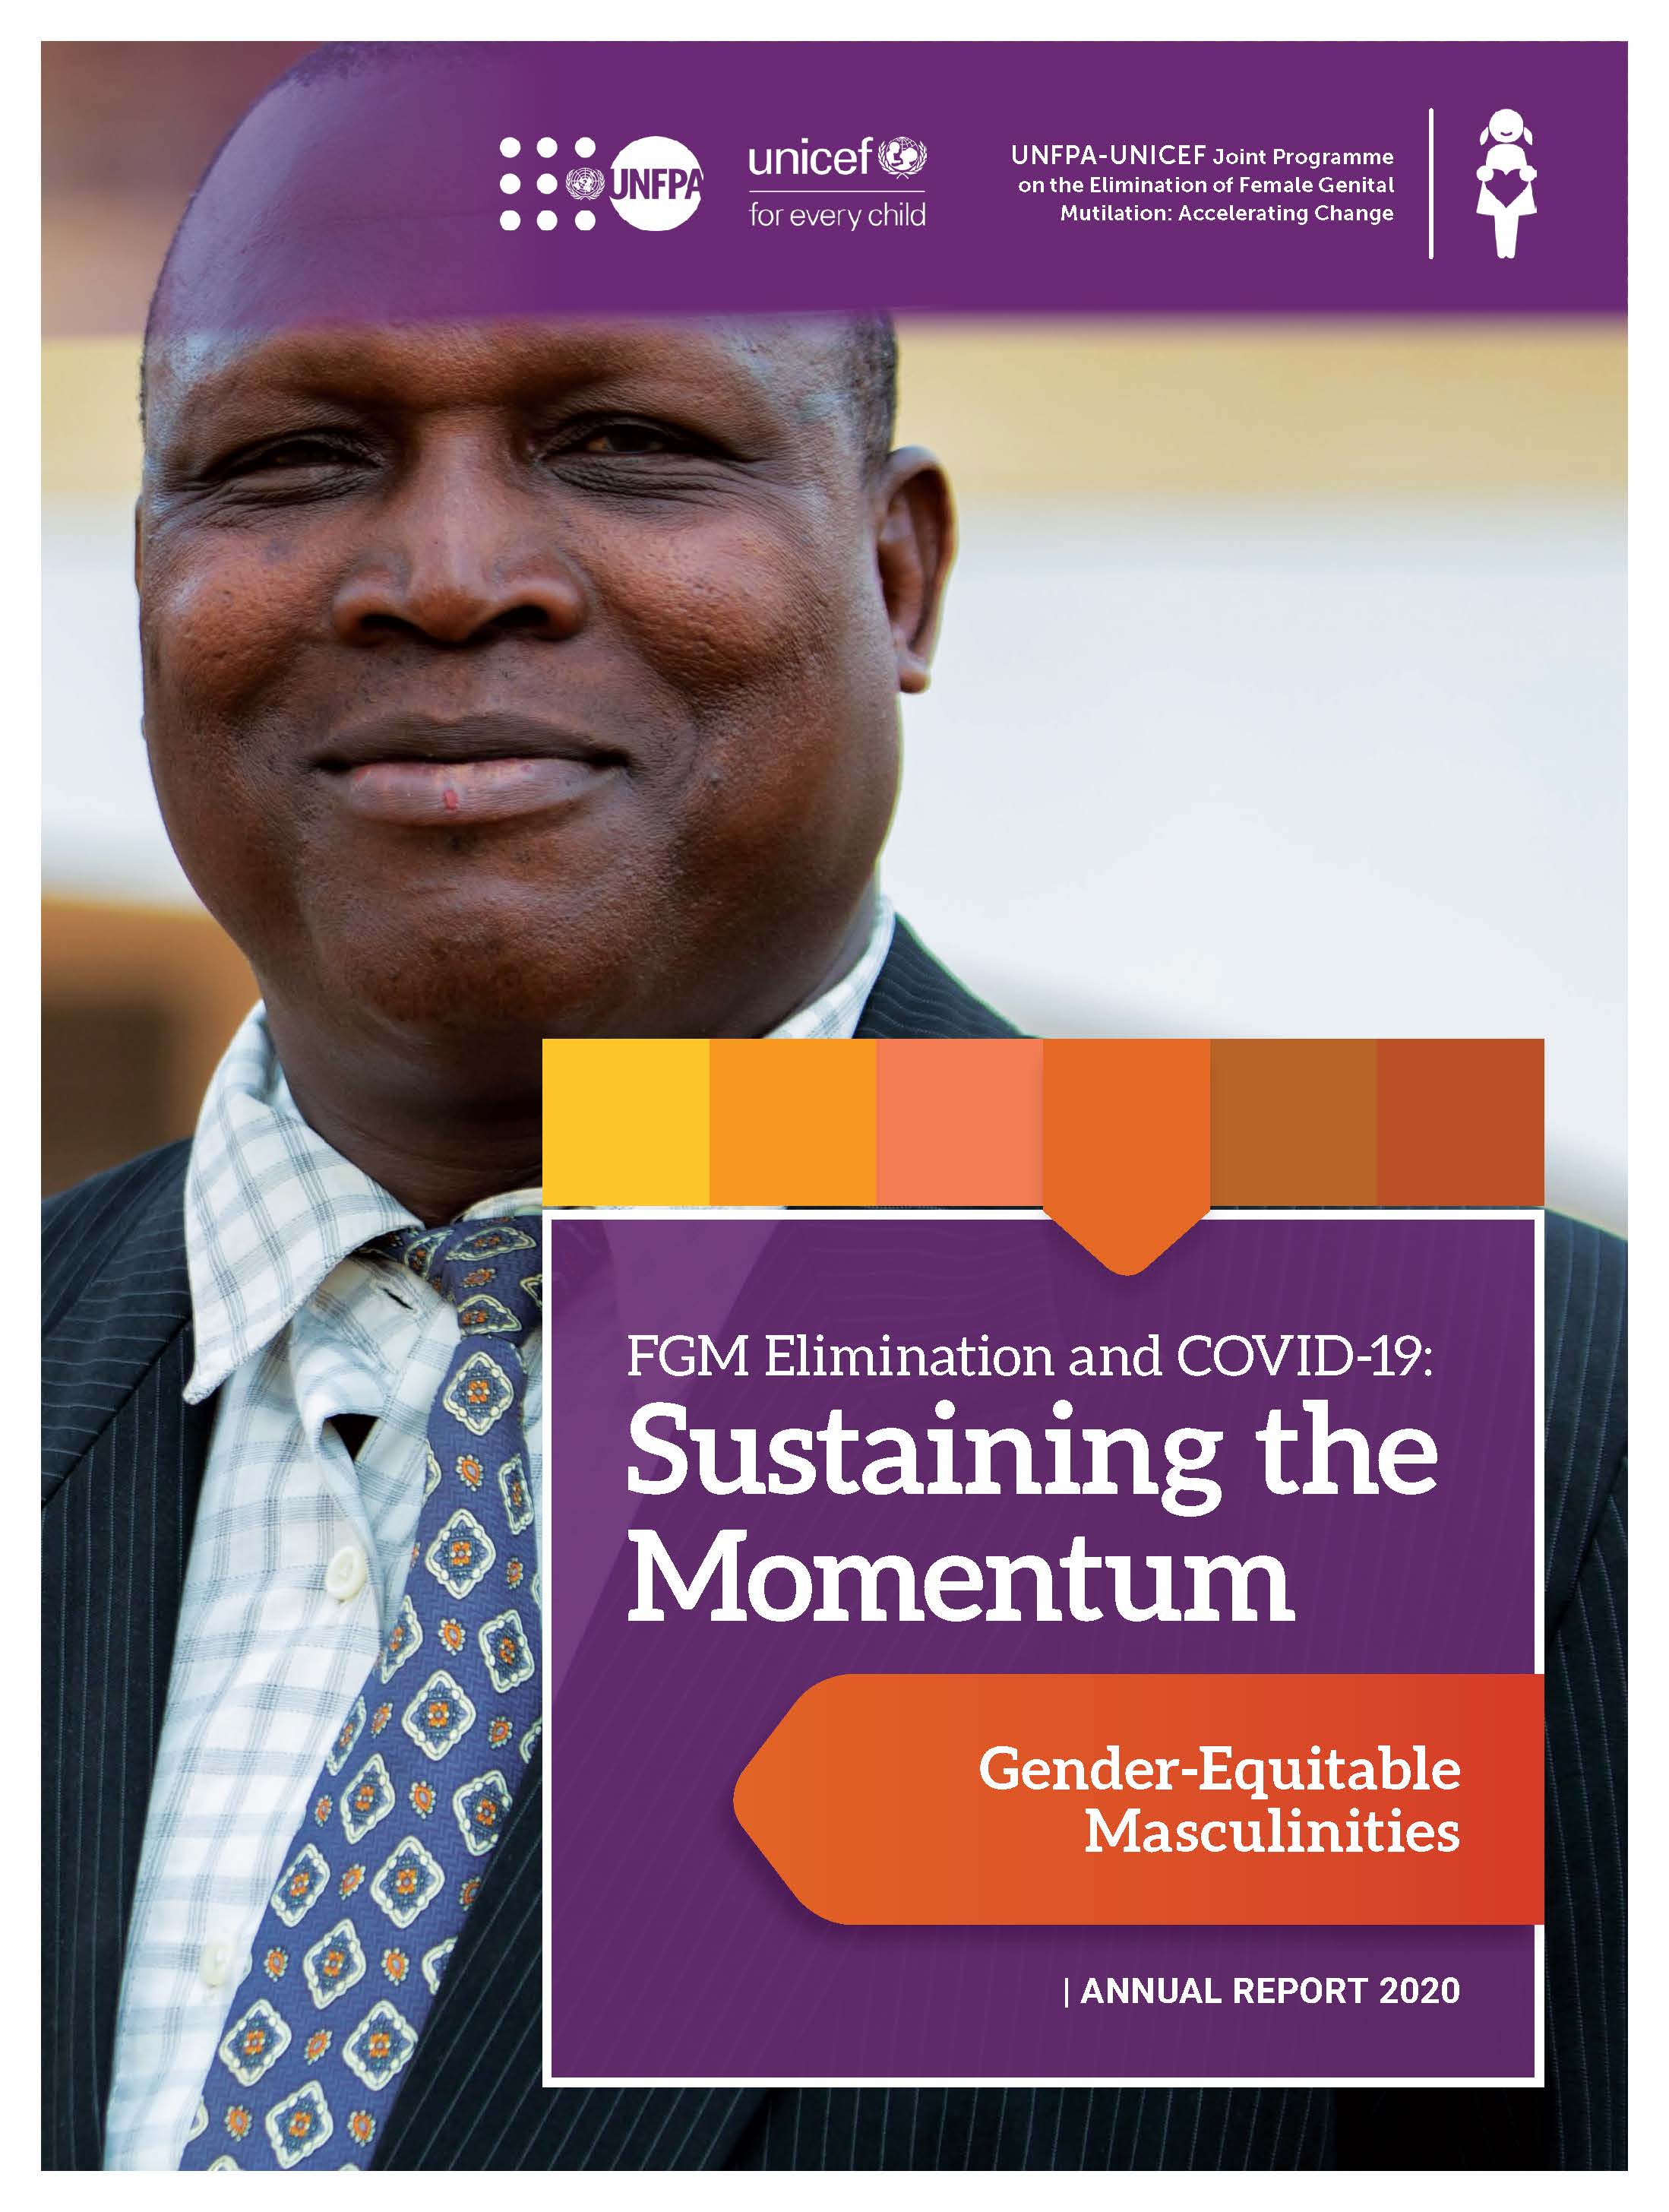 2020 Annual Report on FGM - Gender-Equitable Masculinities in Eliminating Female Genital Mutilation